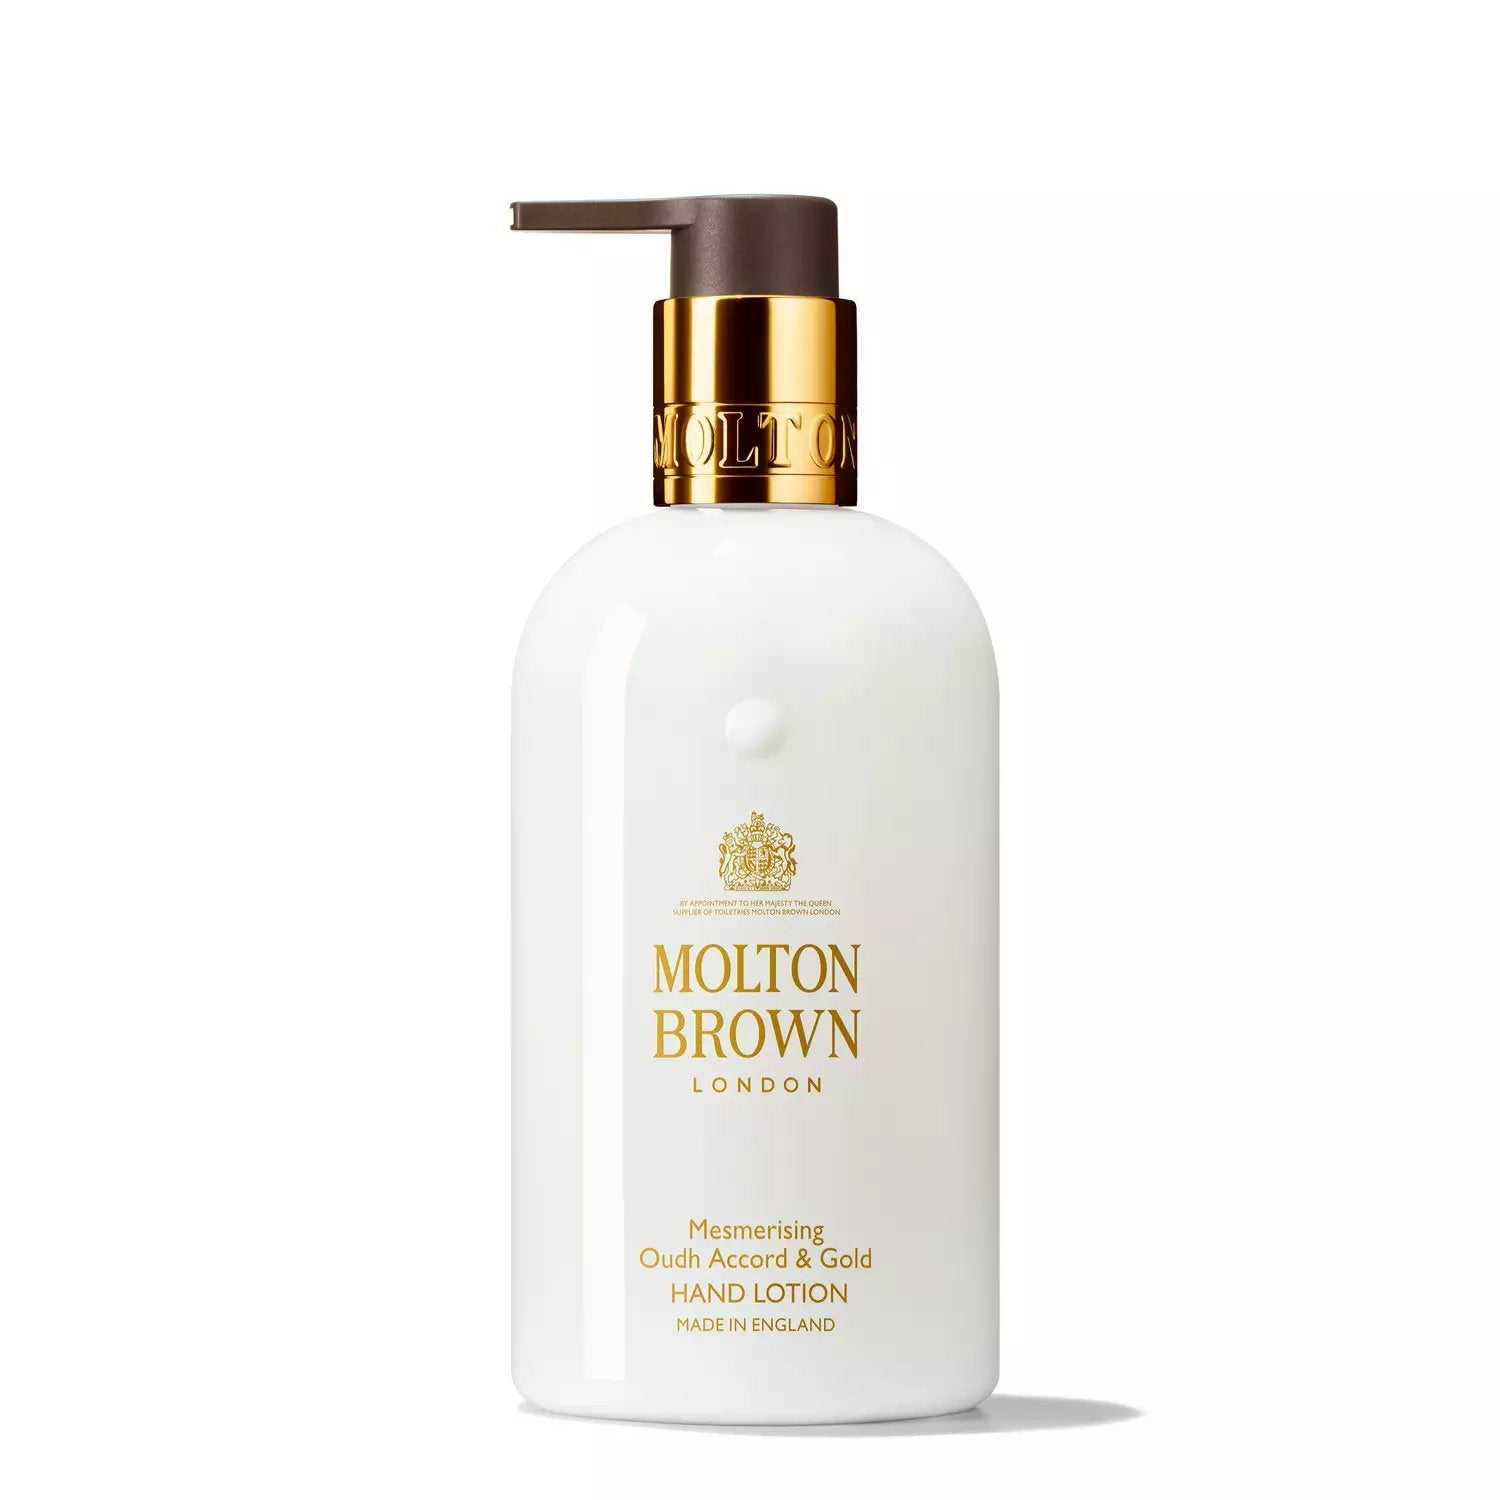 Molton Brown Mesmerizing Oudh Accord & Gold Hand Lotion